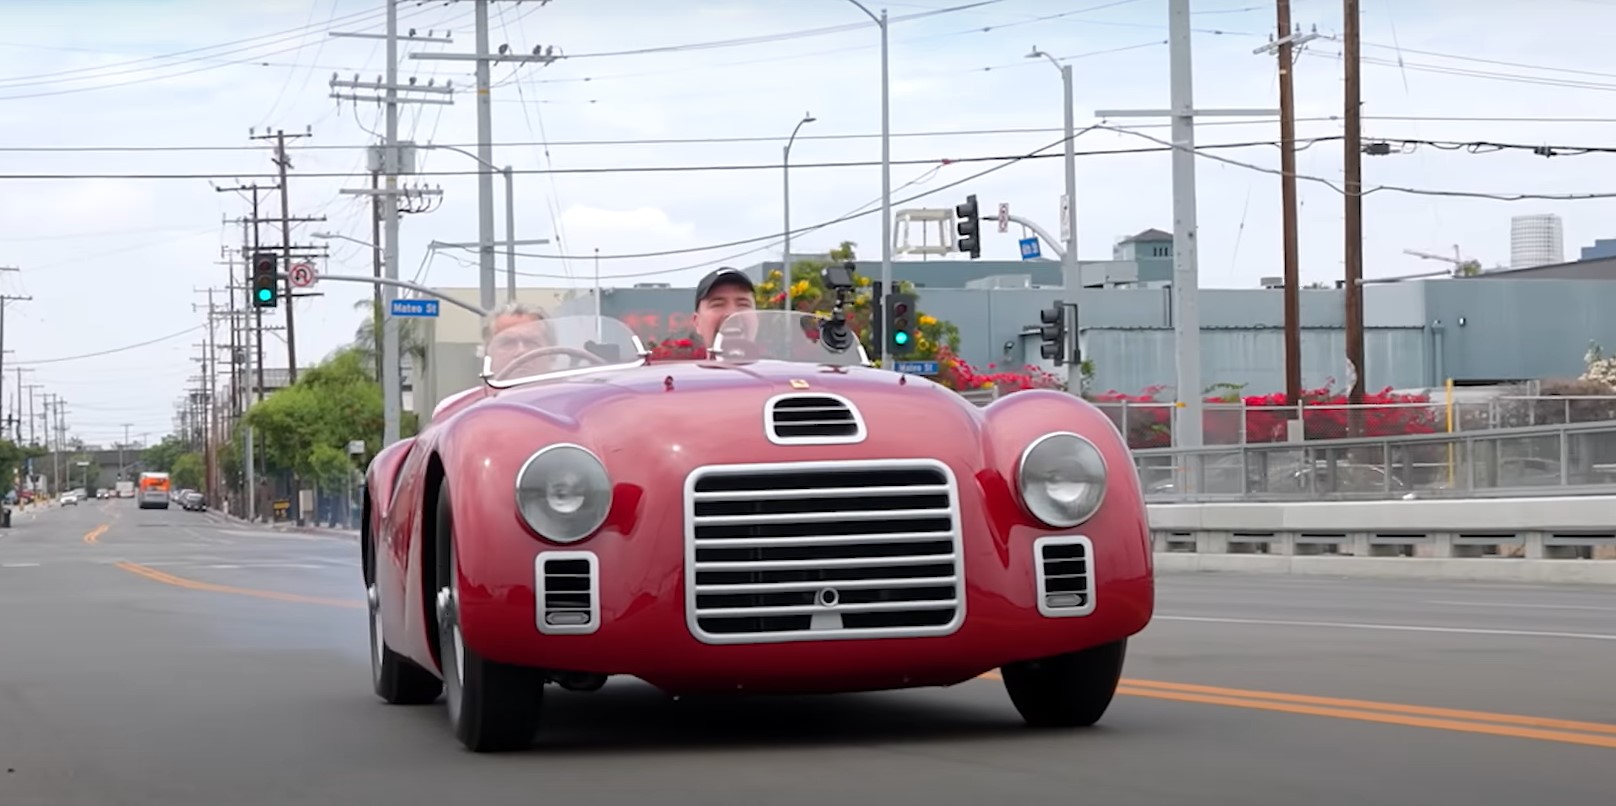 MrBeast Drives The World’s Most Expensive Car Worth $100 Million